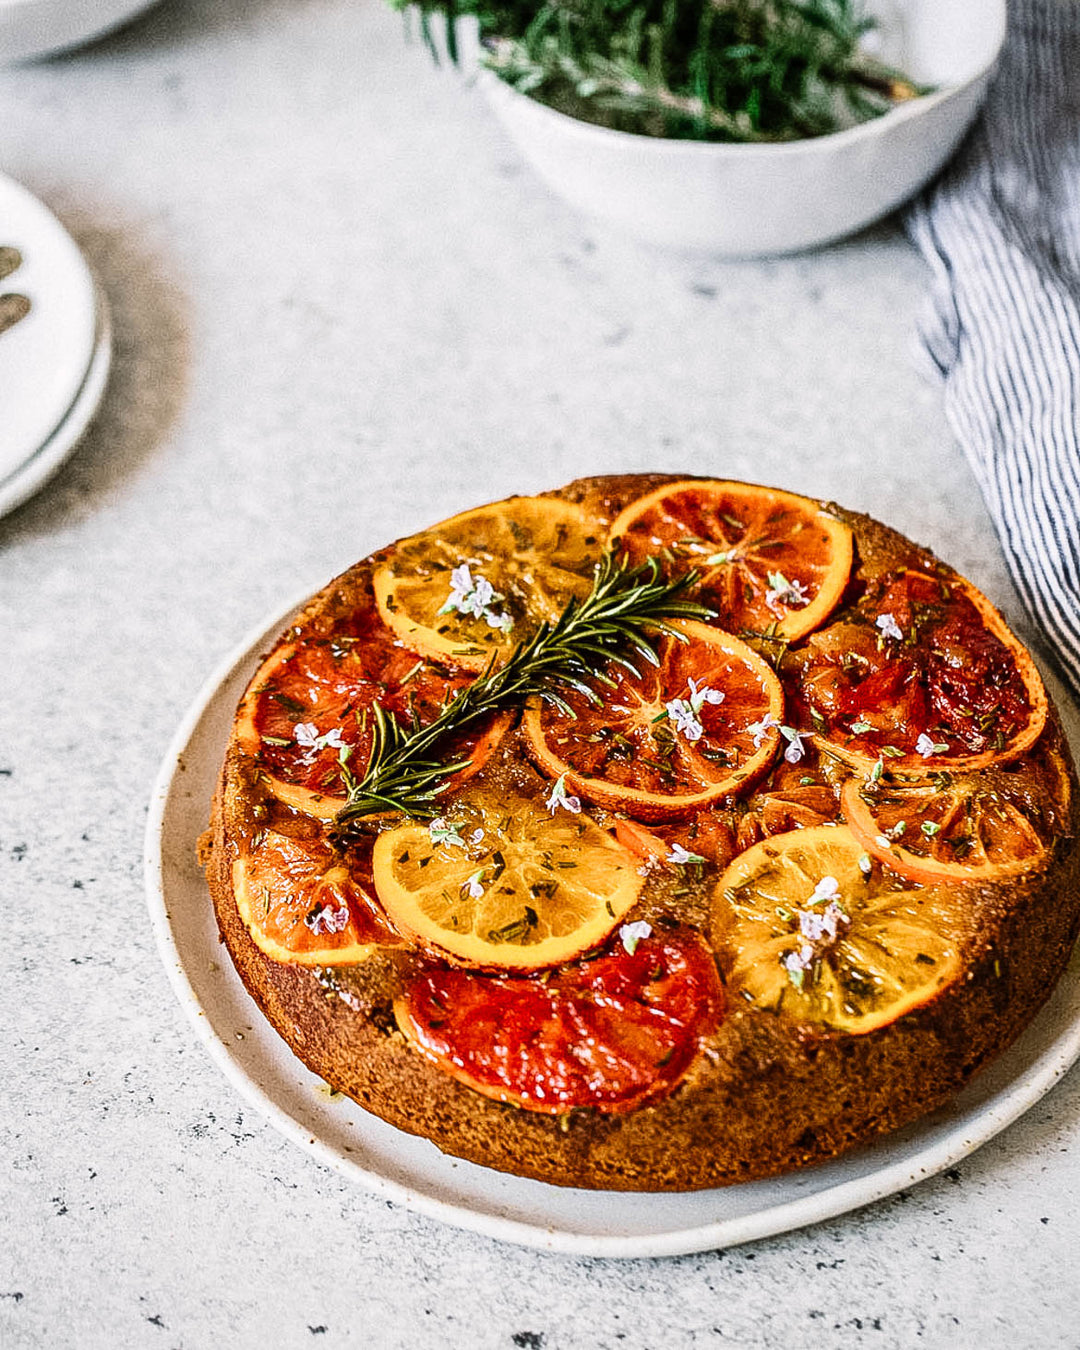 Upside down citrus, rosemary, olive oil and almond cake